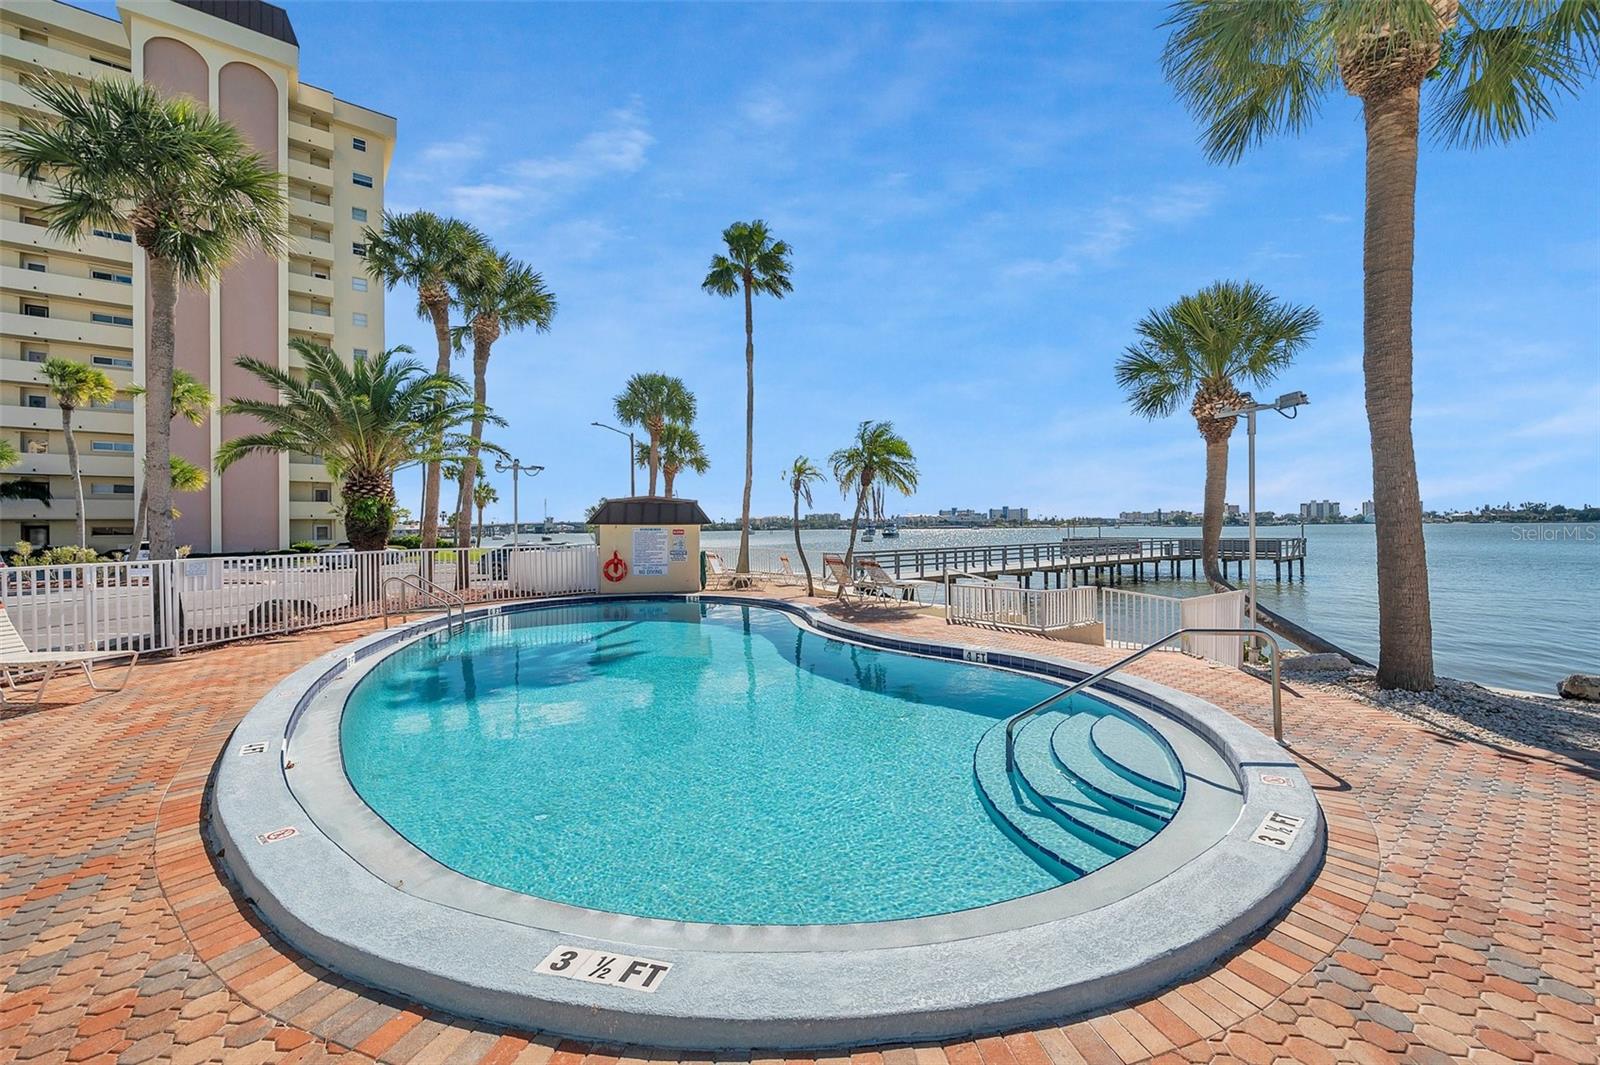 There are 2 pools. This one overlooks the Intracoastal waters.